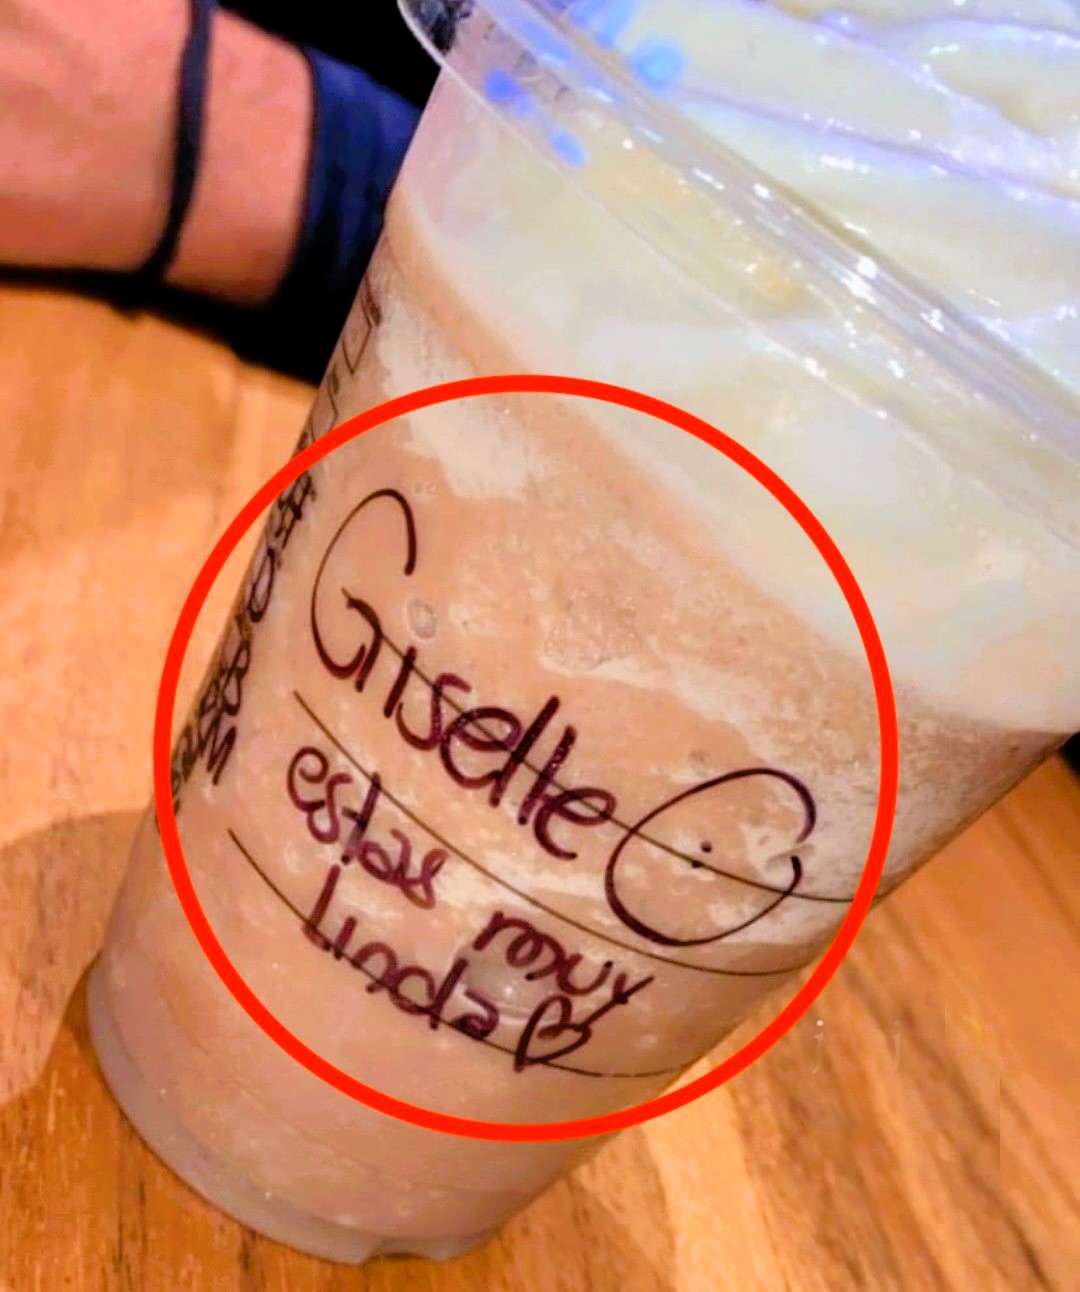 Starbucks apologizes after barista leaves a "Giselle, you are very pretty" message on a customer's cup, sparking a debate on harassment.